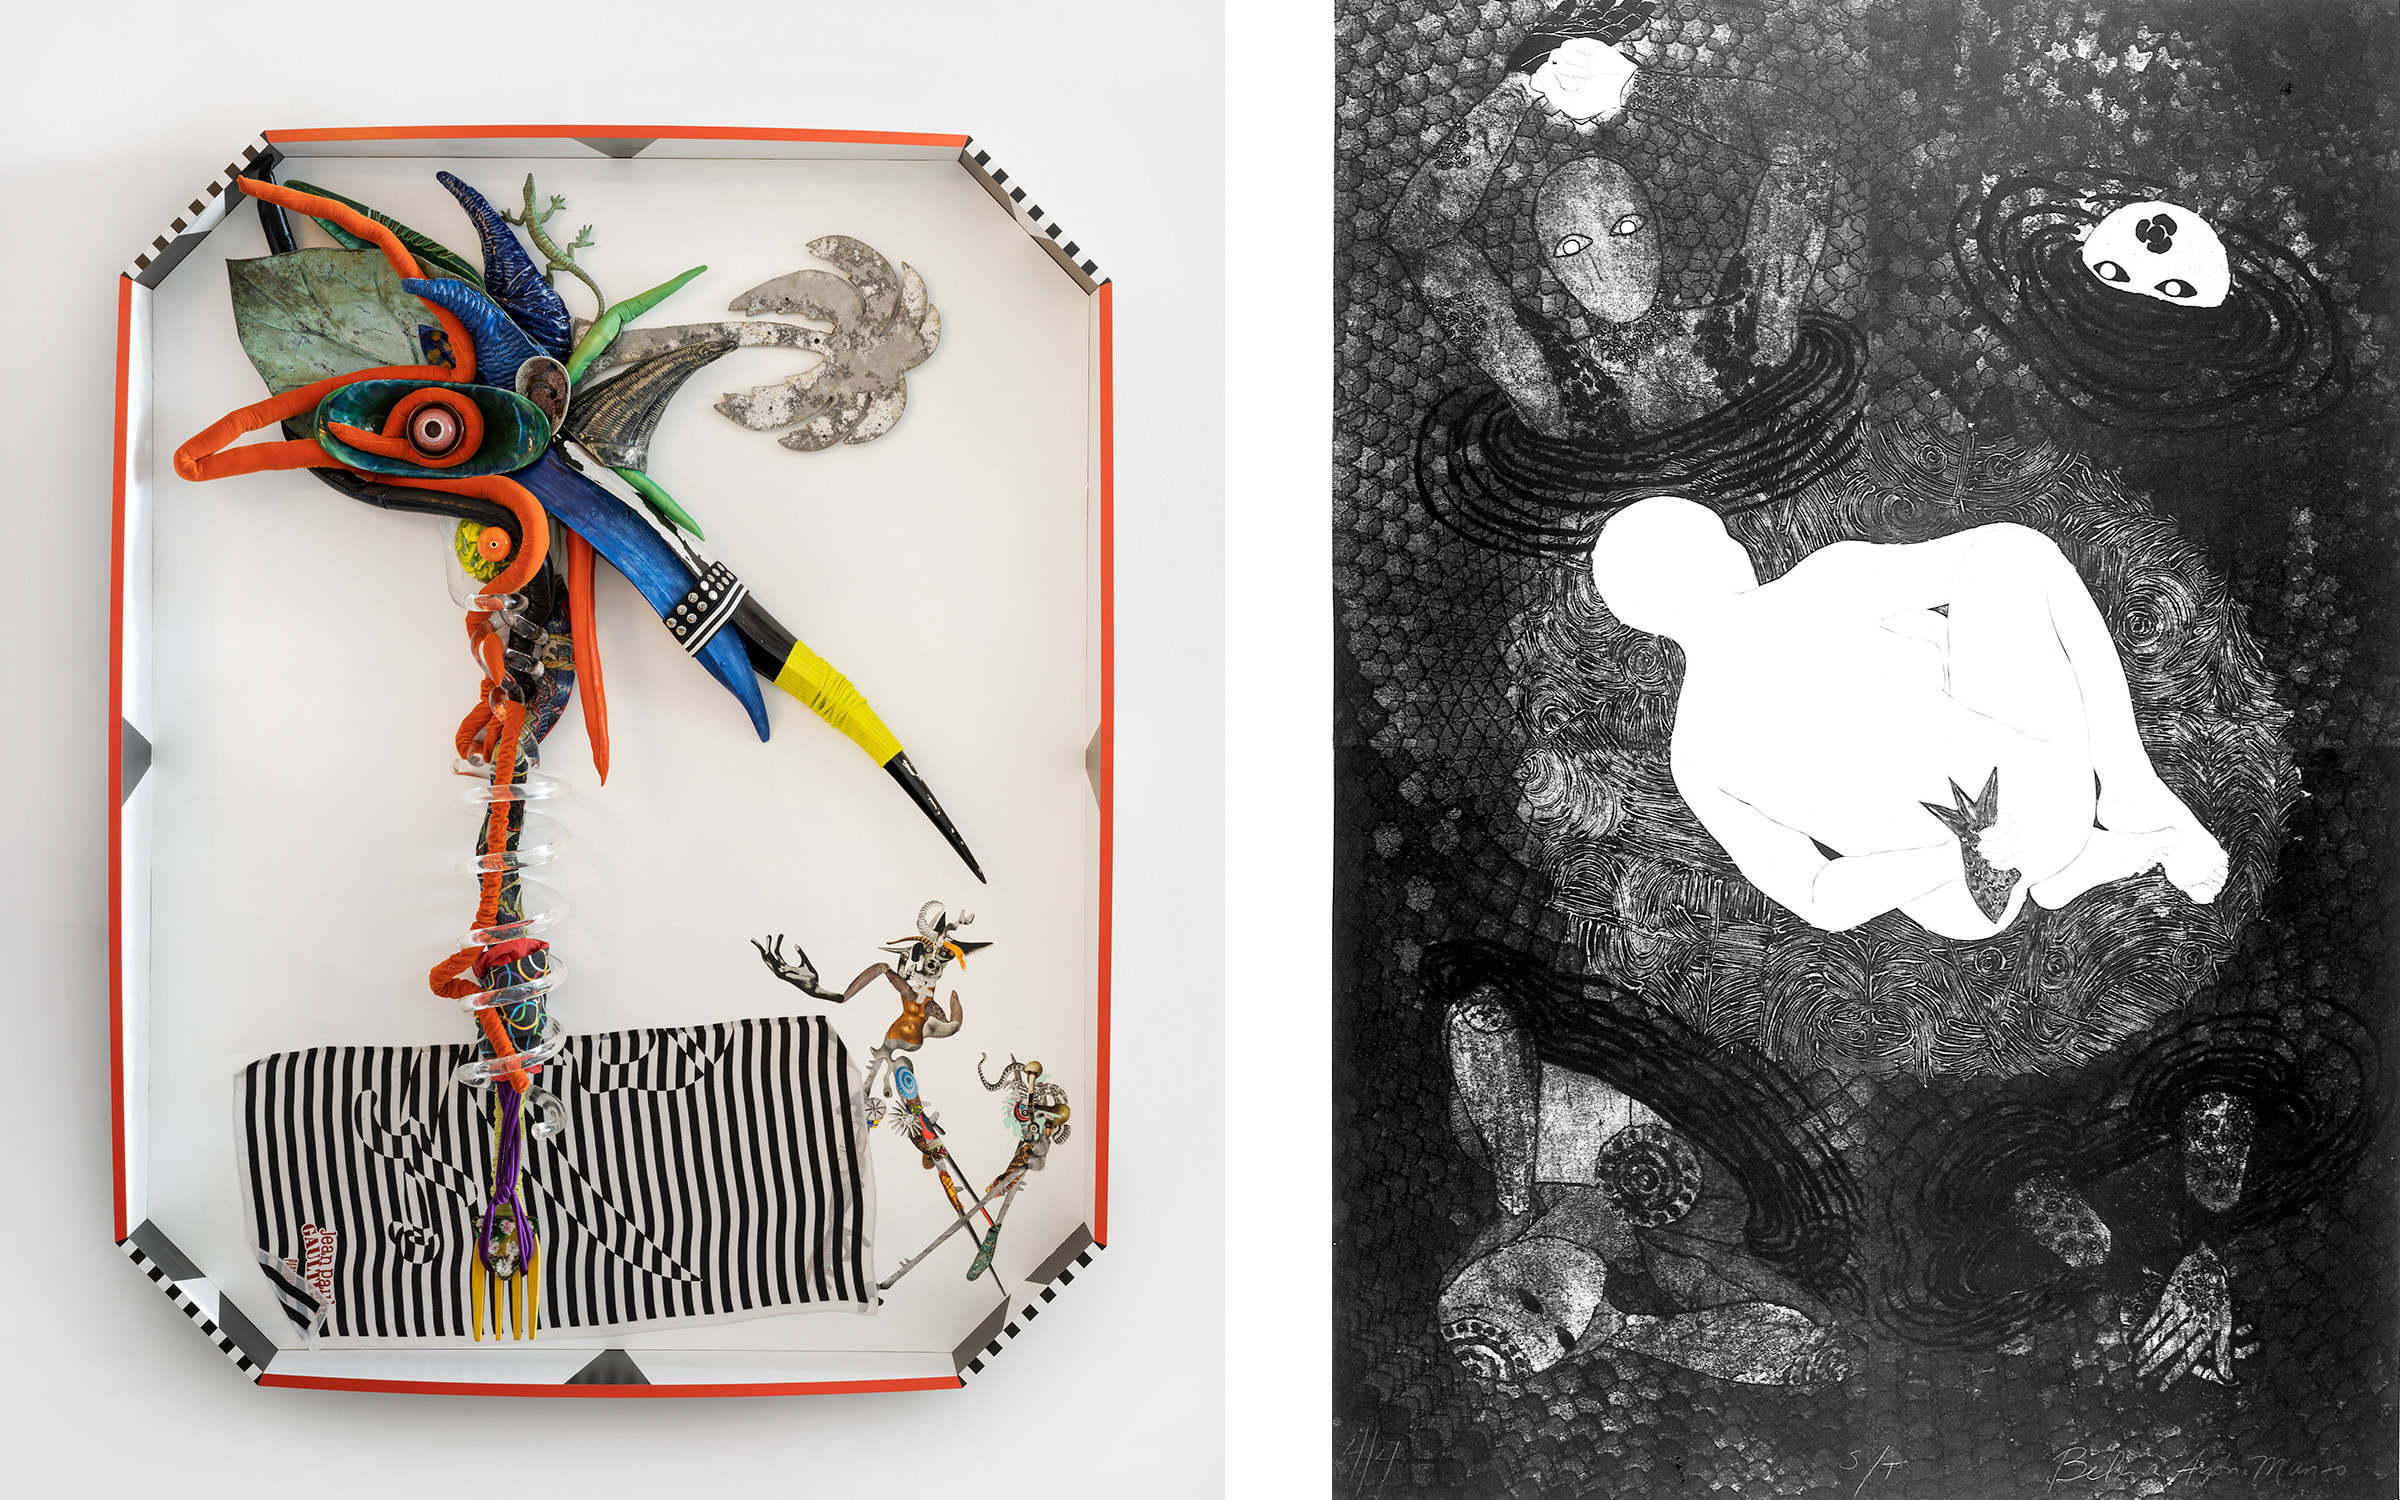 Left: Pepe Mar, On a Spiral, 2022. Courtesy of the artist and David Castillo Gallery. Photo by Zach Balber. Right: Belkis Ayón Manso, Untitled (woman in fetal position), 1996. Courtesy of the Belkis Ayón Estate and David Castillo Gallery. Photo by Jose A. Figueroa.